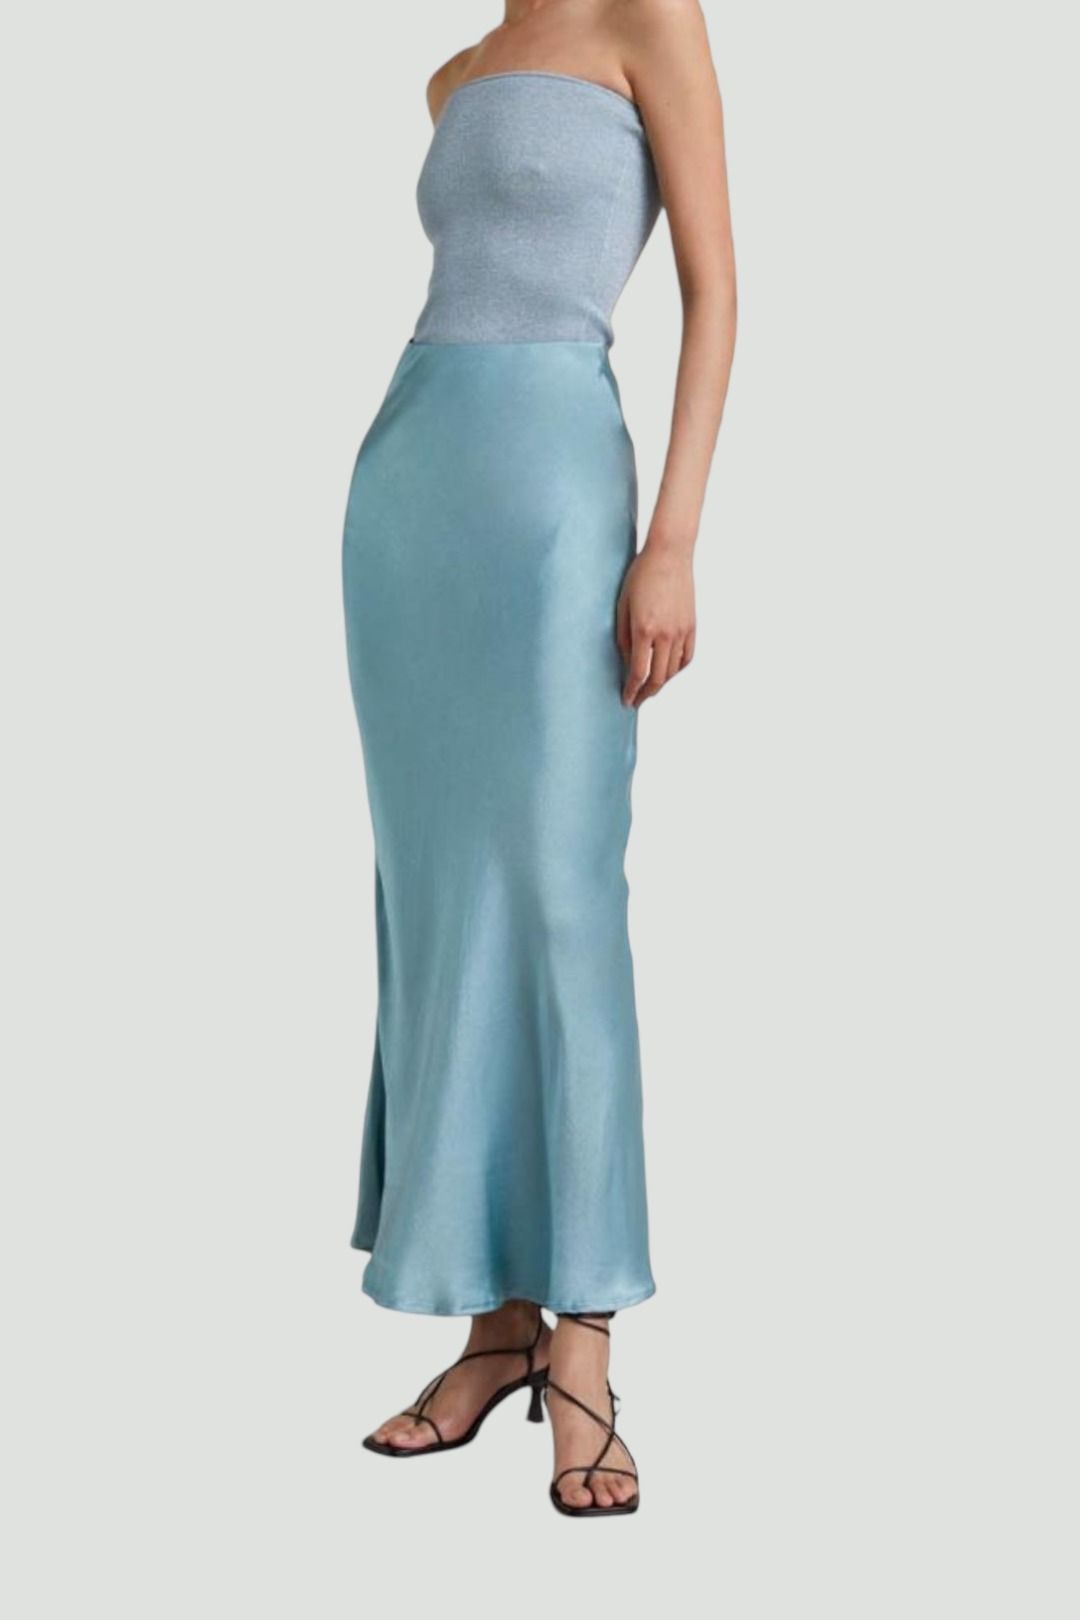 Bec and Bridge - Marley Satin Maxi Skirt in Blue